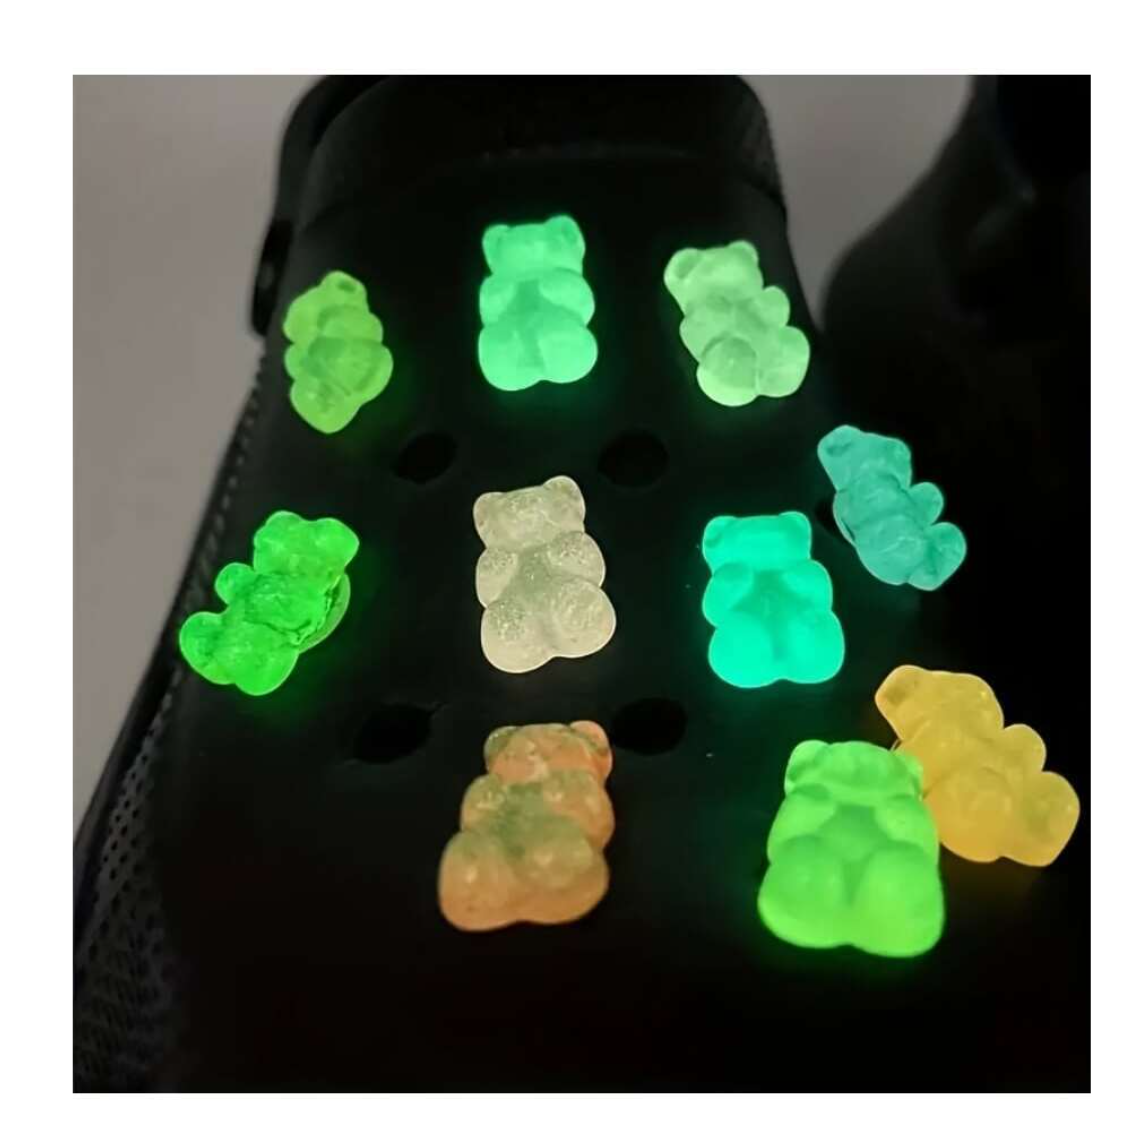 Glowing Footwear Fun: 10pcs Luminous Little Bear Shoe Charms - DIY Delight for Crocs and Sandals!